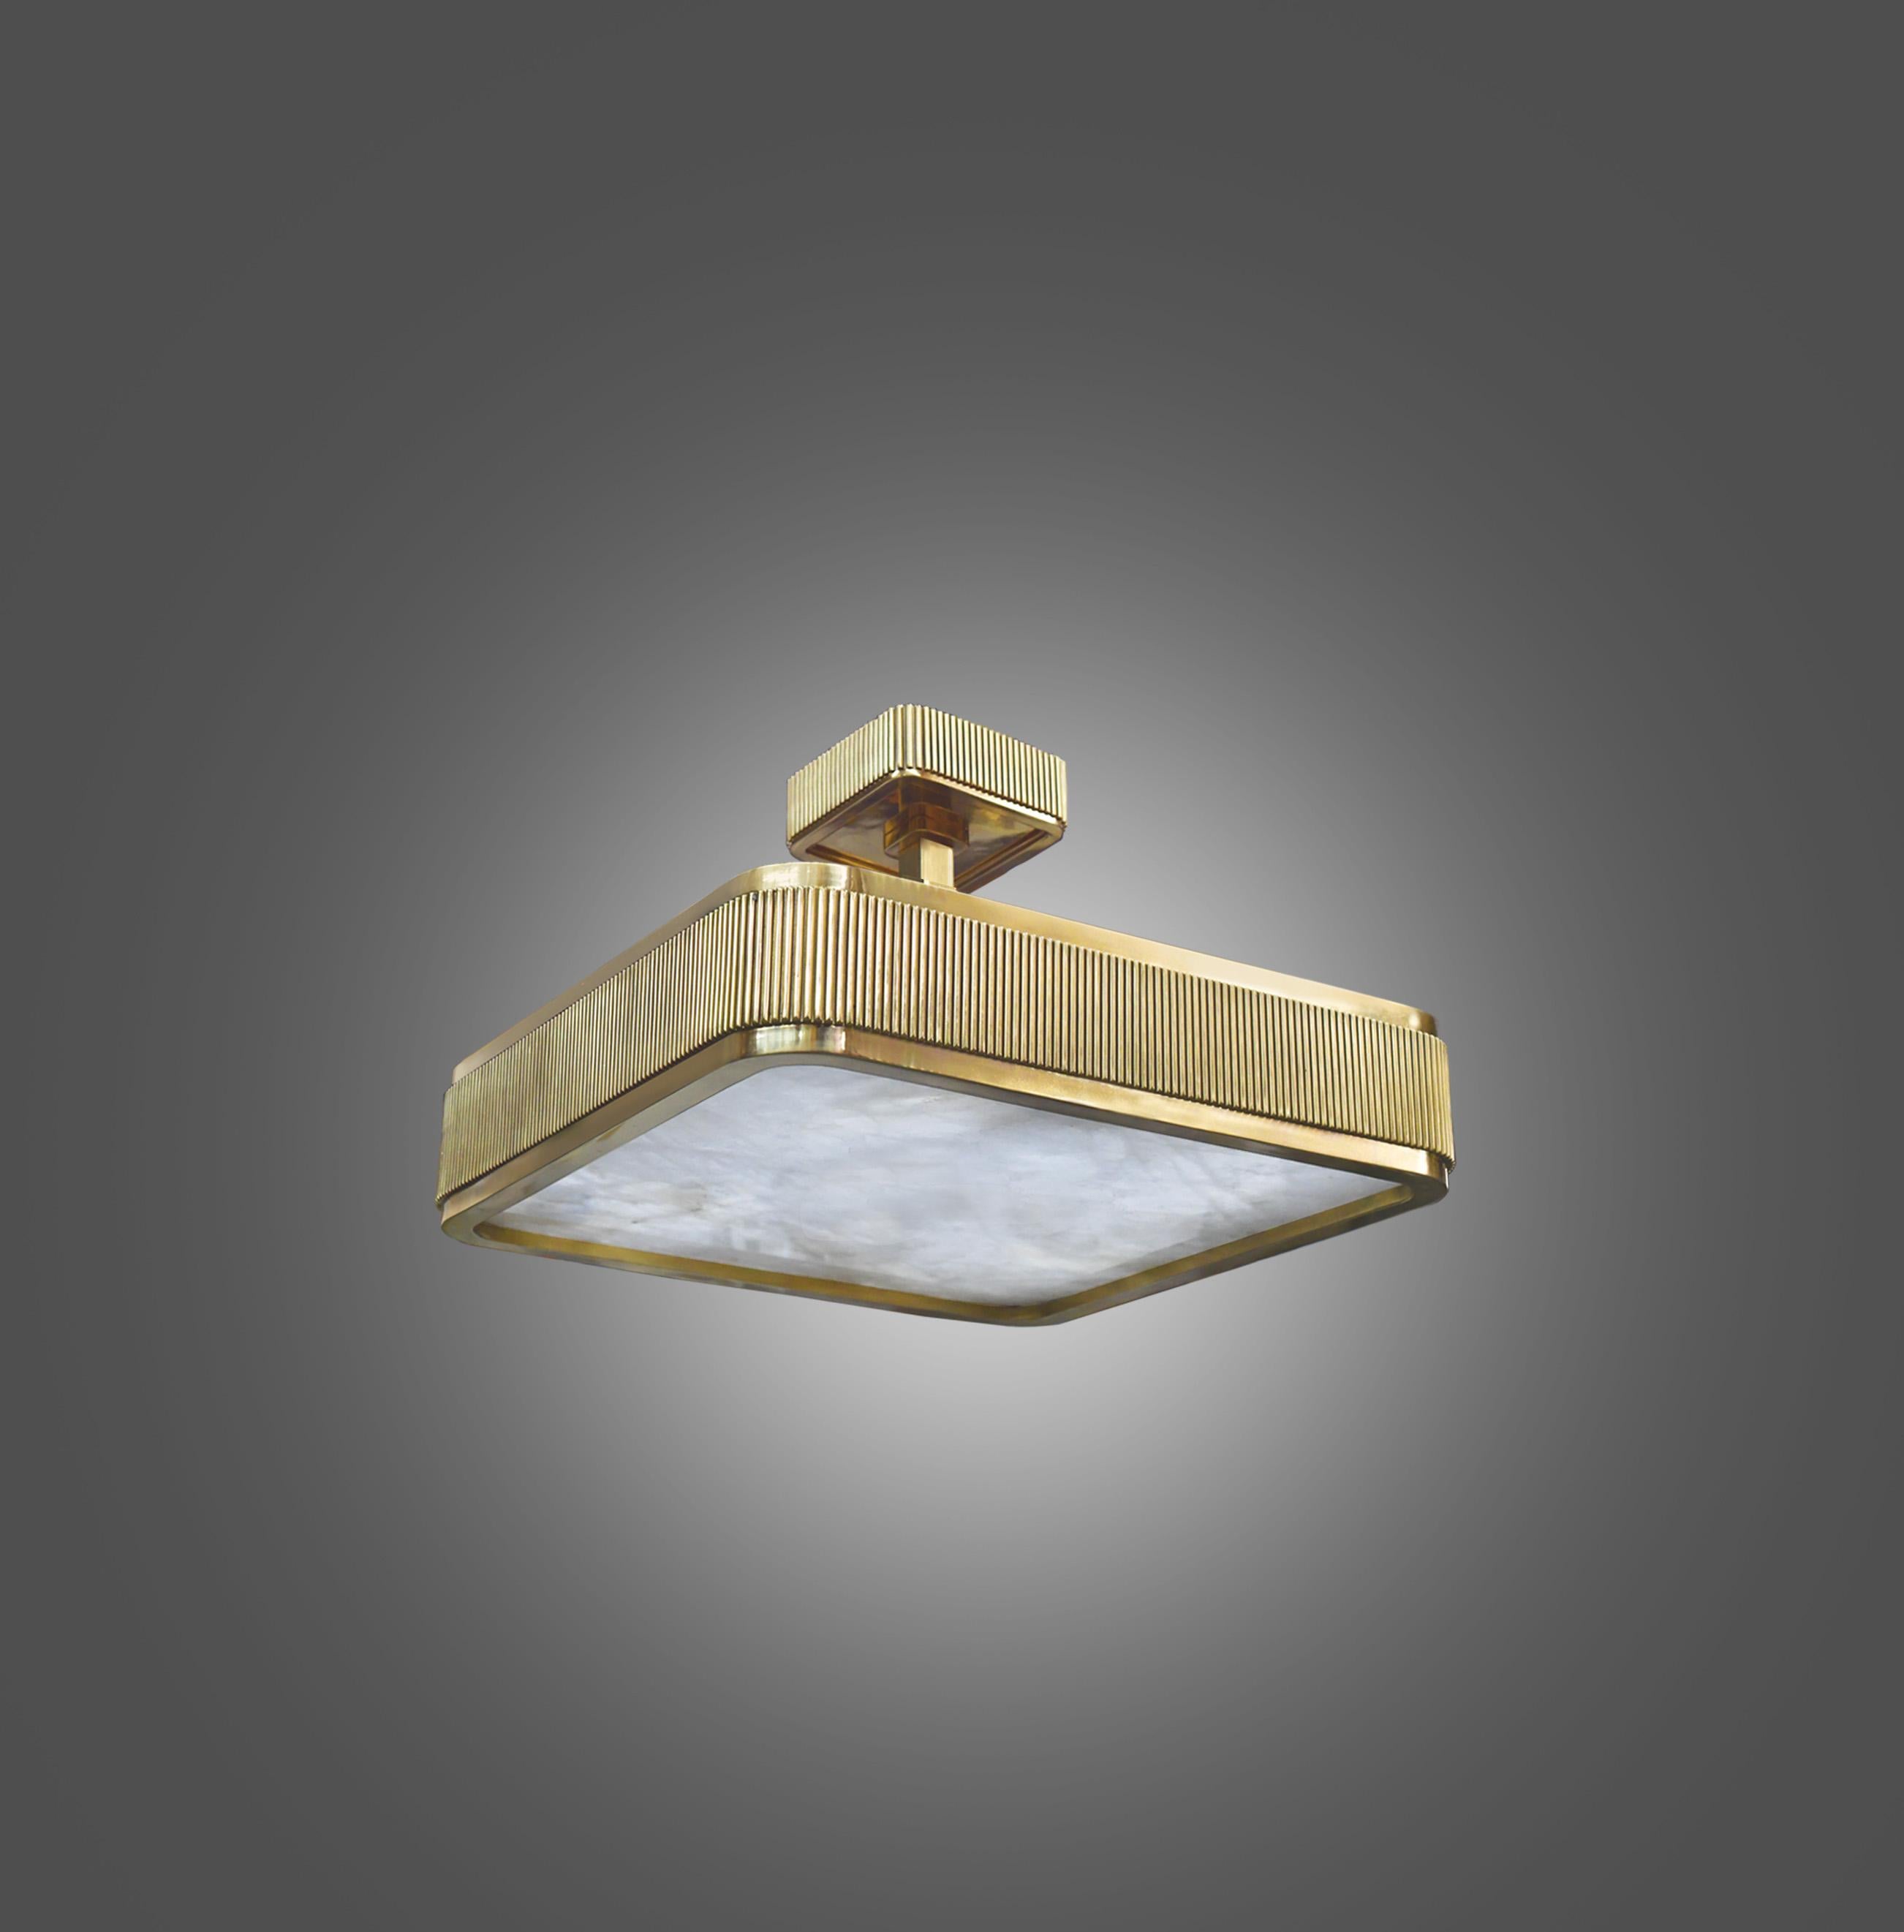 elegant forms fixture with polished brass frame and rock crystal panel, BSO rock crystal semi flush mount created by Phoenix, NYC.
Custom size and metal finish upon request.
Height can be adjustable.